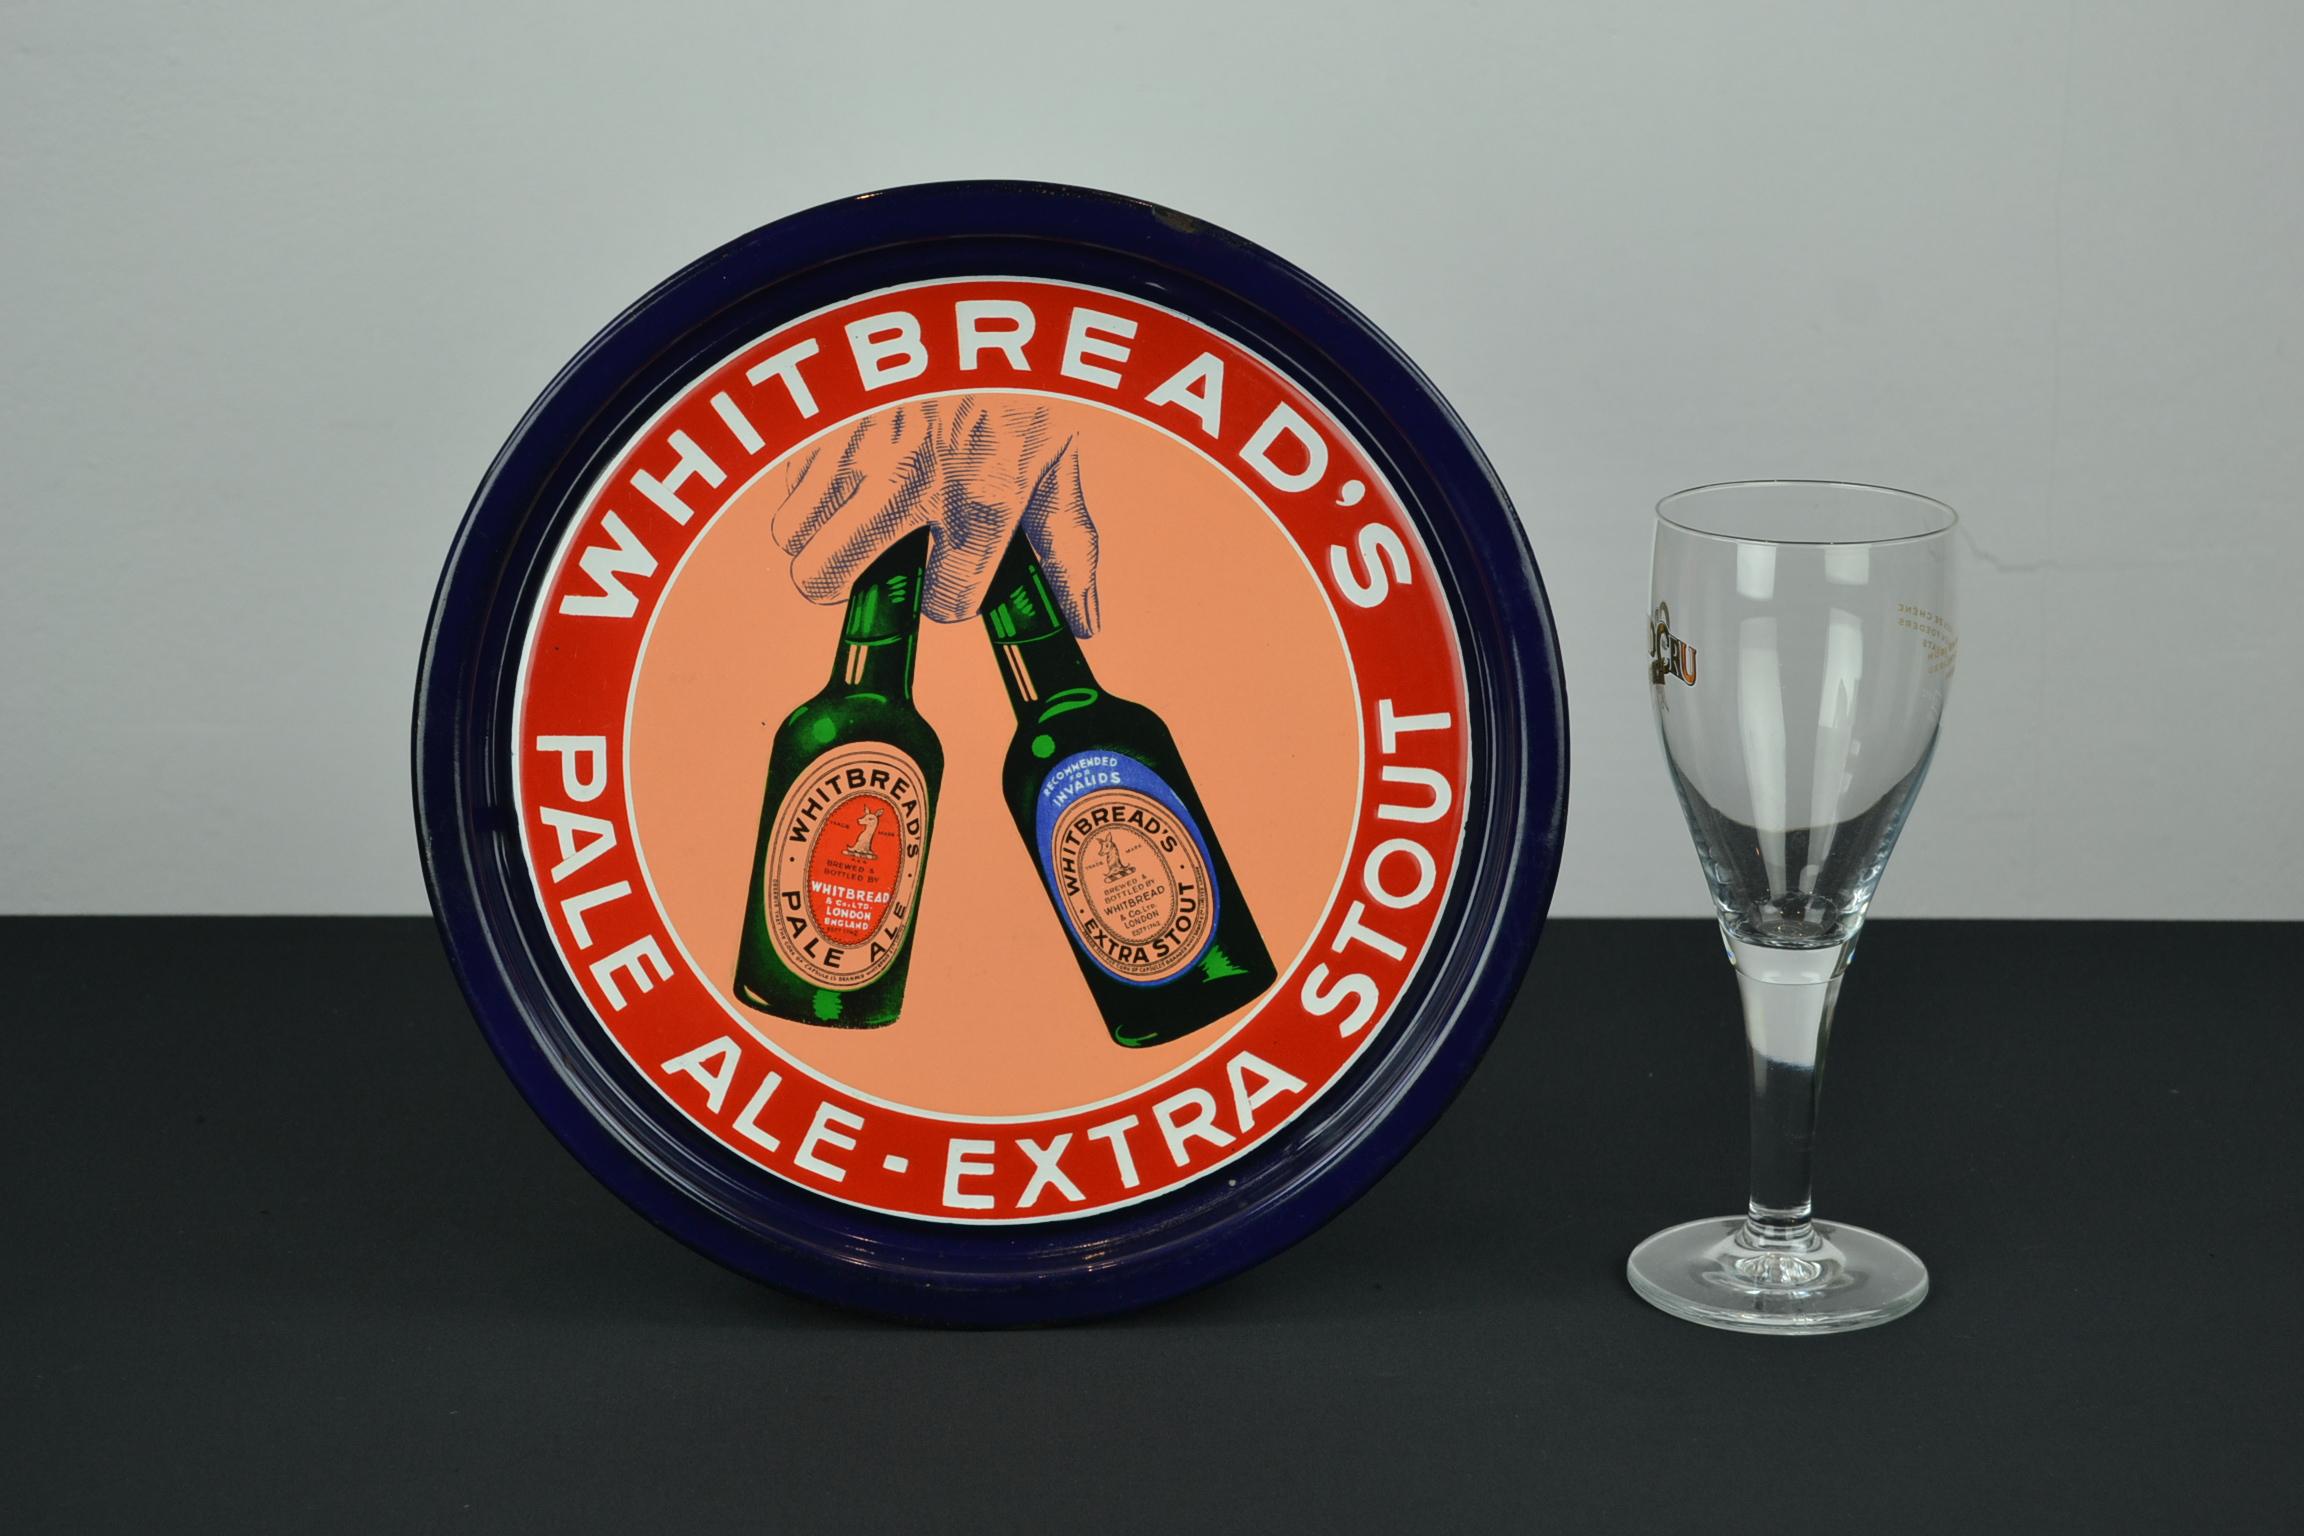 Enamel Tray for Whitbread's Beer of the Mid-20th Century. 
This Porcelain Sign for Beer dates circa 1940s-1950s. 
A Pub Tray made for Whitbread's Beer, the Pale Ale and the Extra Stout. 
This vintage Enamel Sign - vintage Porcelain Sign has the